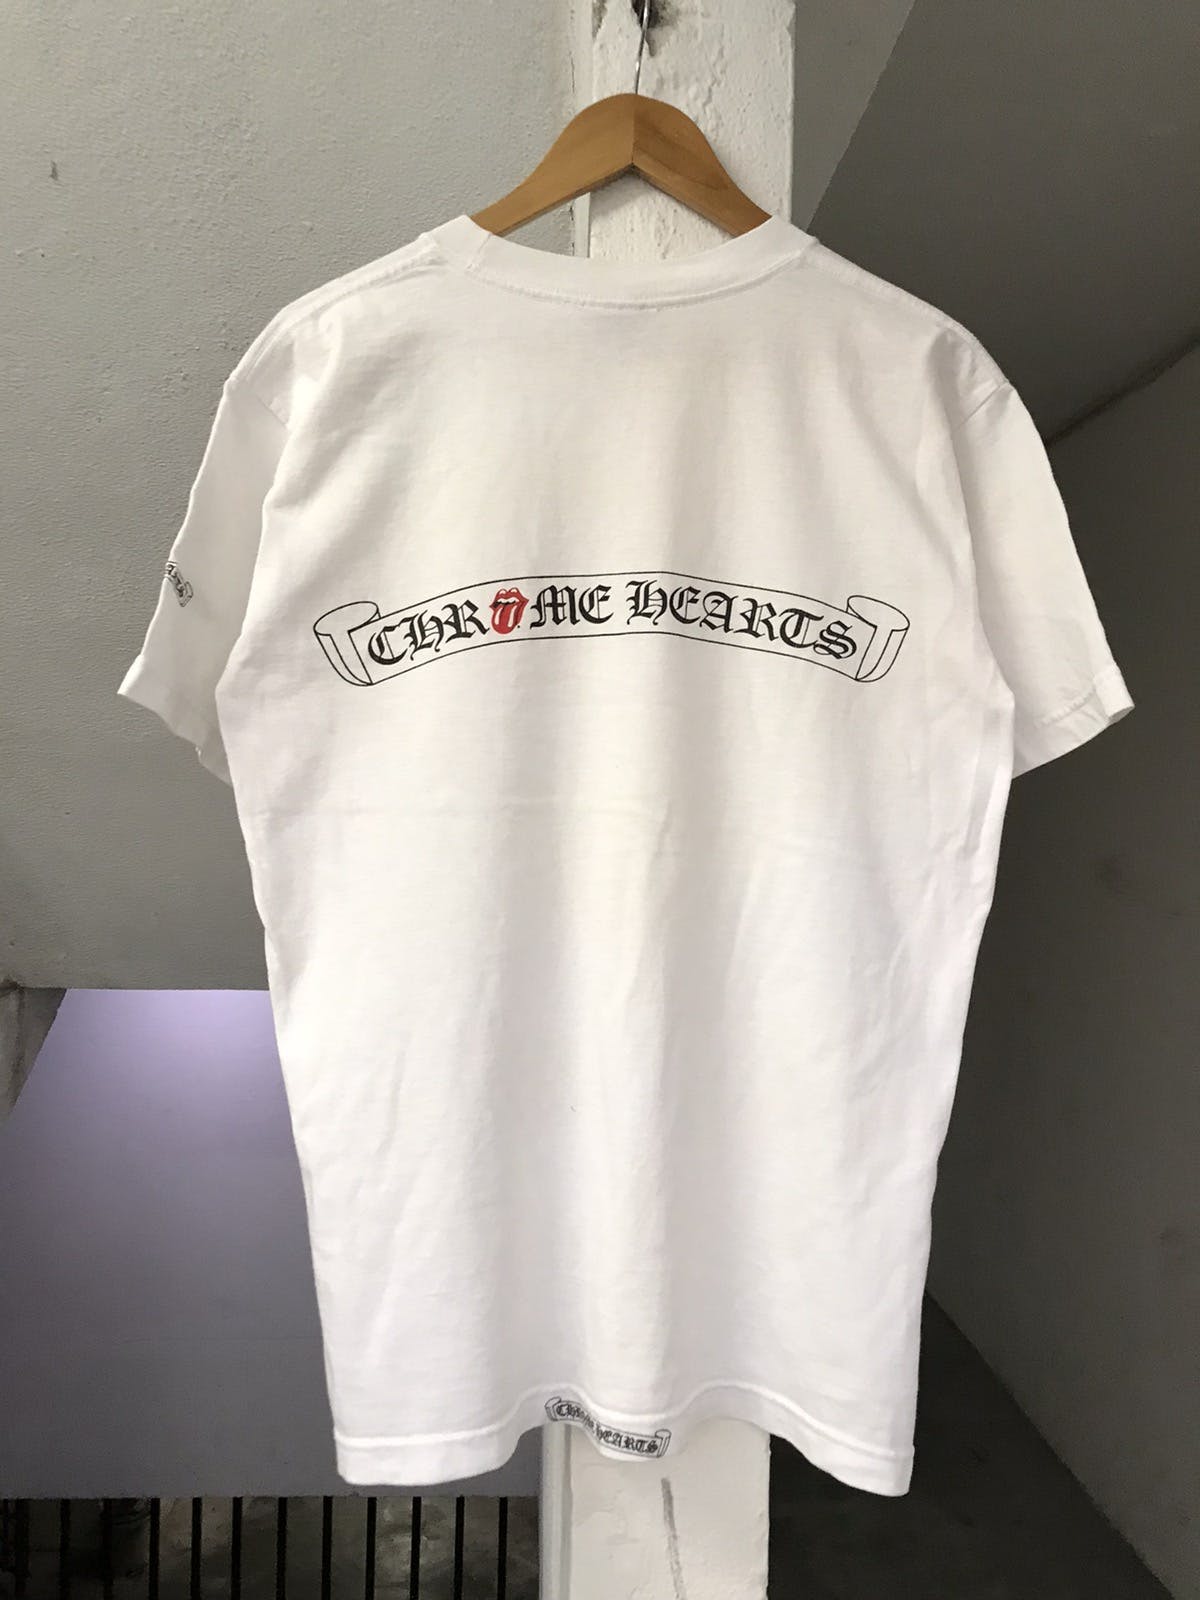 Vintage Chrome Hearts x Rolling Stone Tee